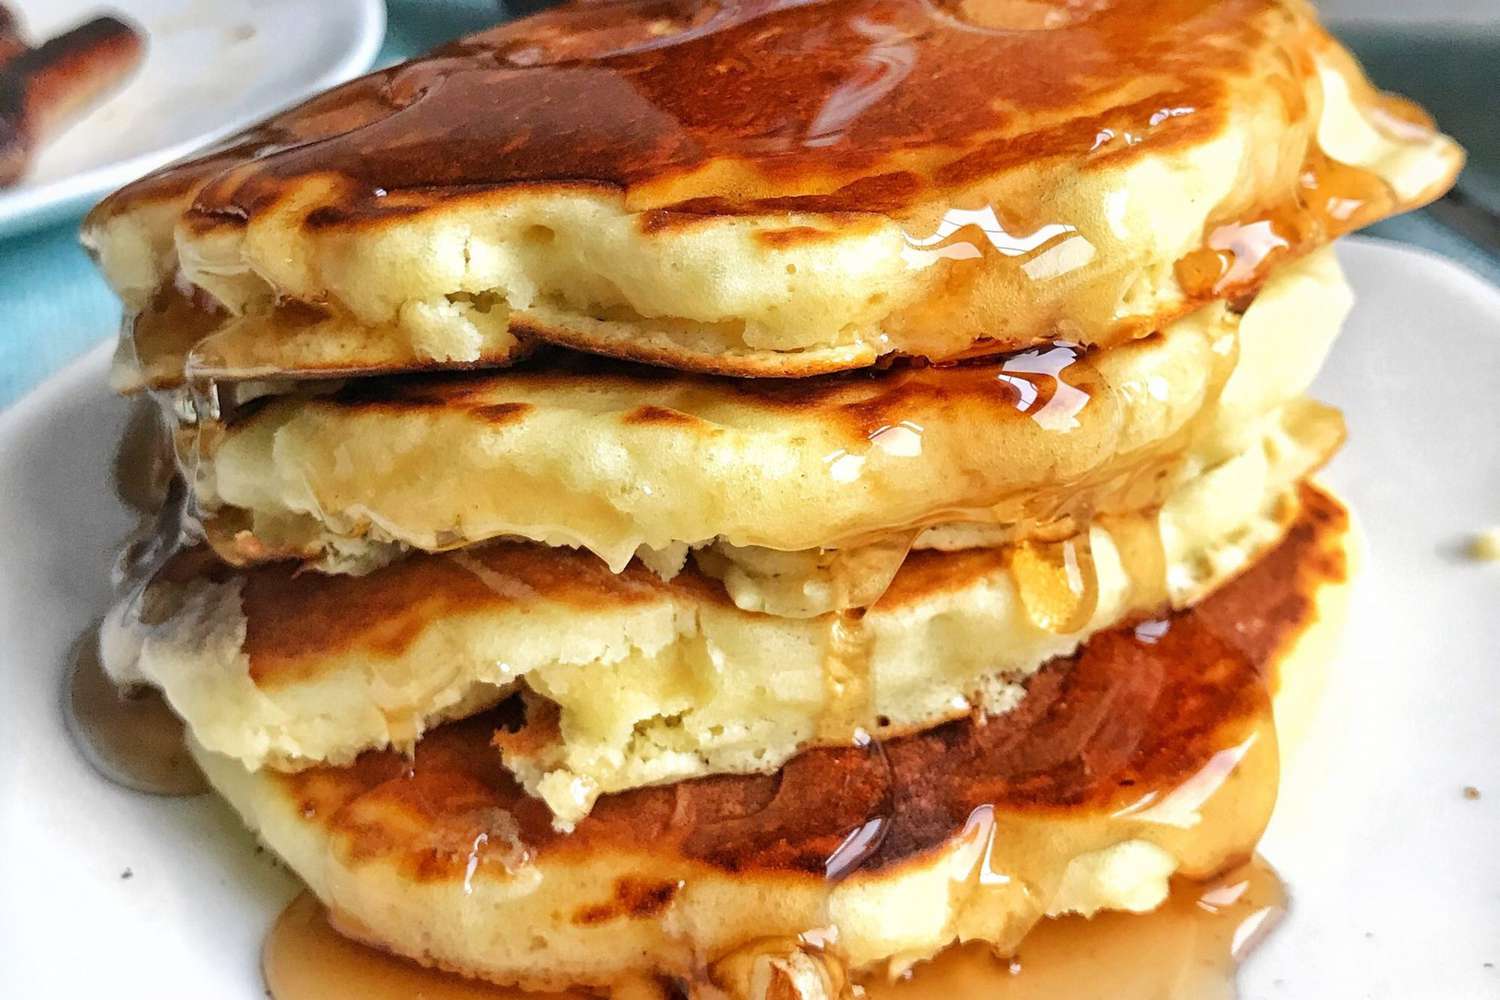 Good old fashioned pancakes stacked with syrup drizzled on top